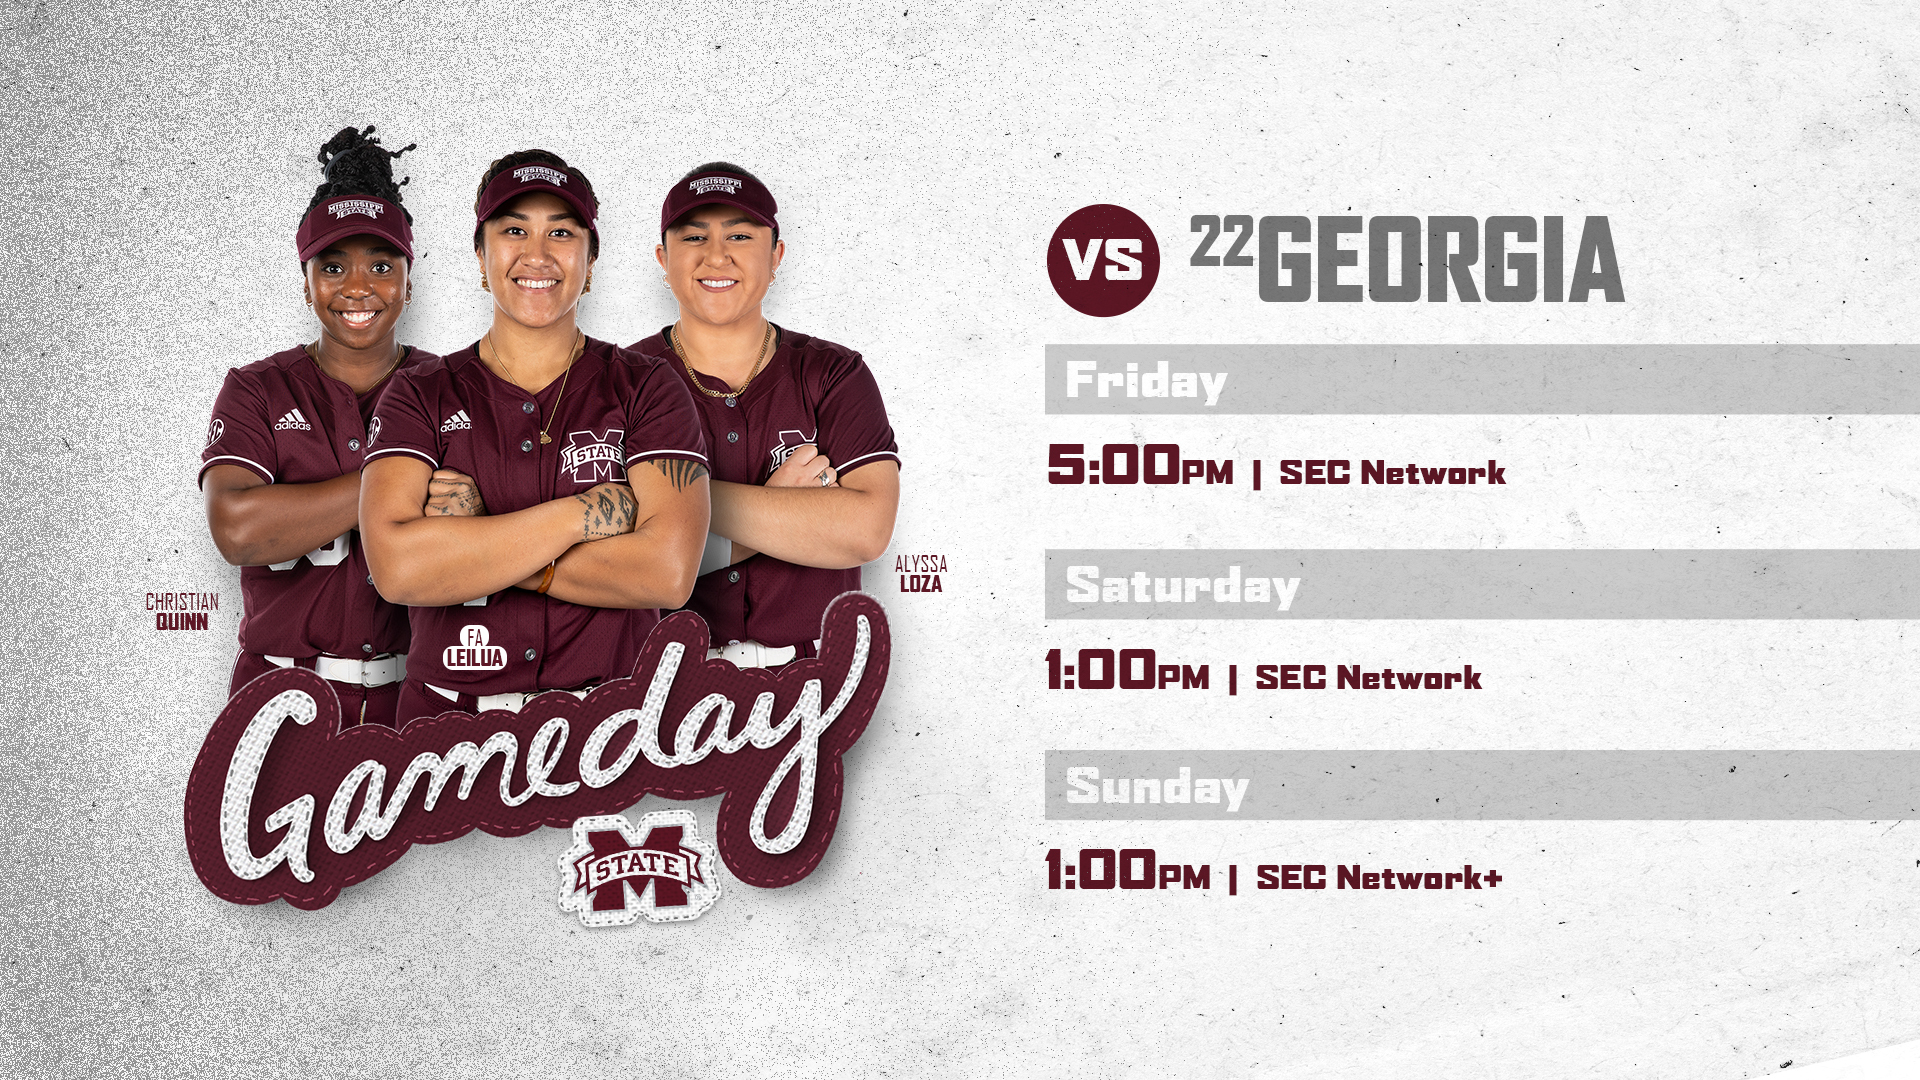 Maroon, white and gray gameday graphic with images of MSU softball players Christian Quinn, Fa Leilua and Alyssa Loza